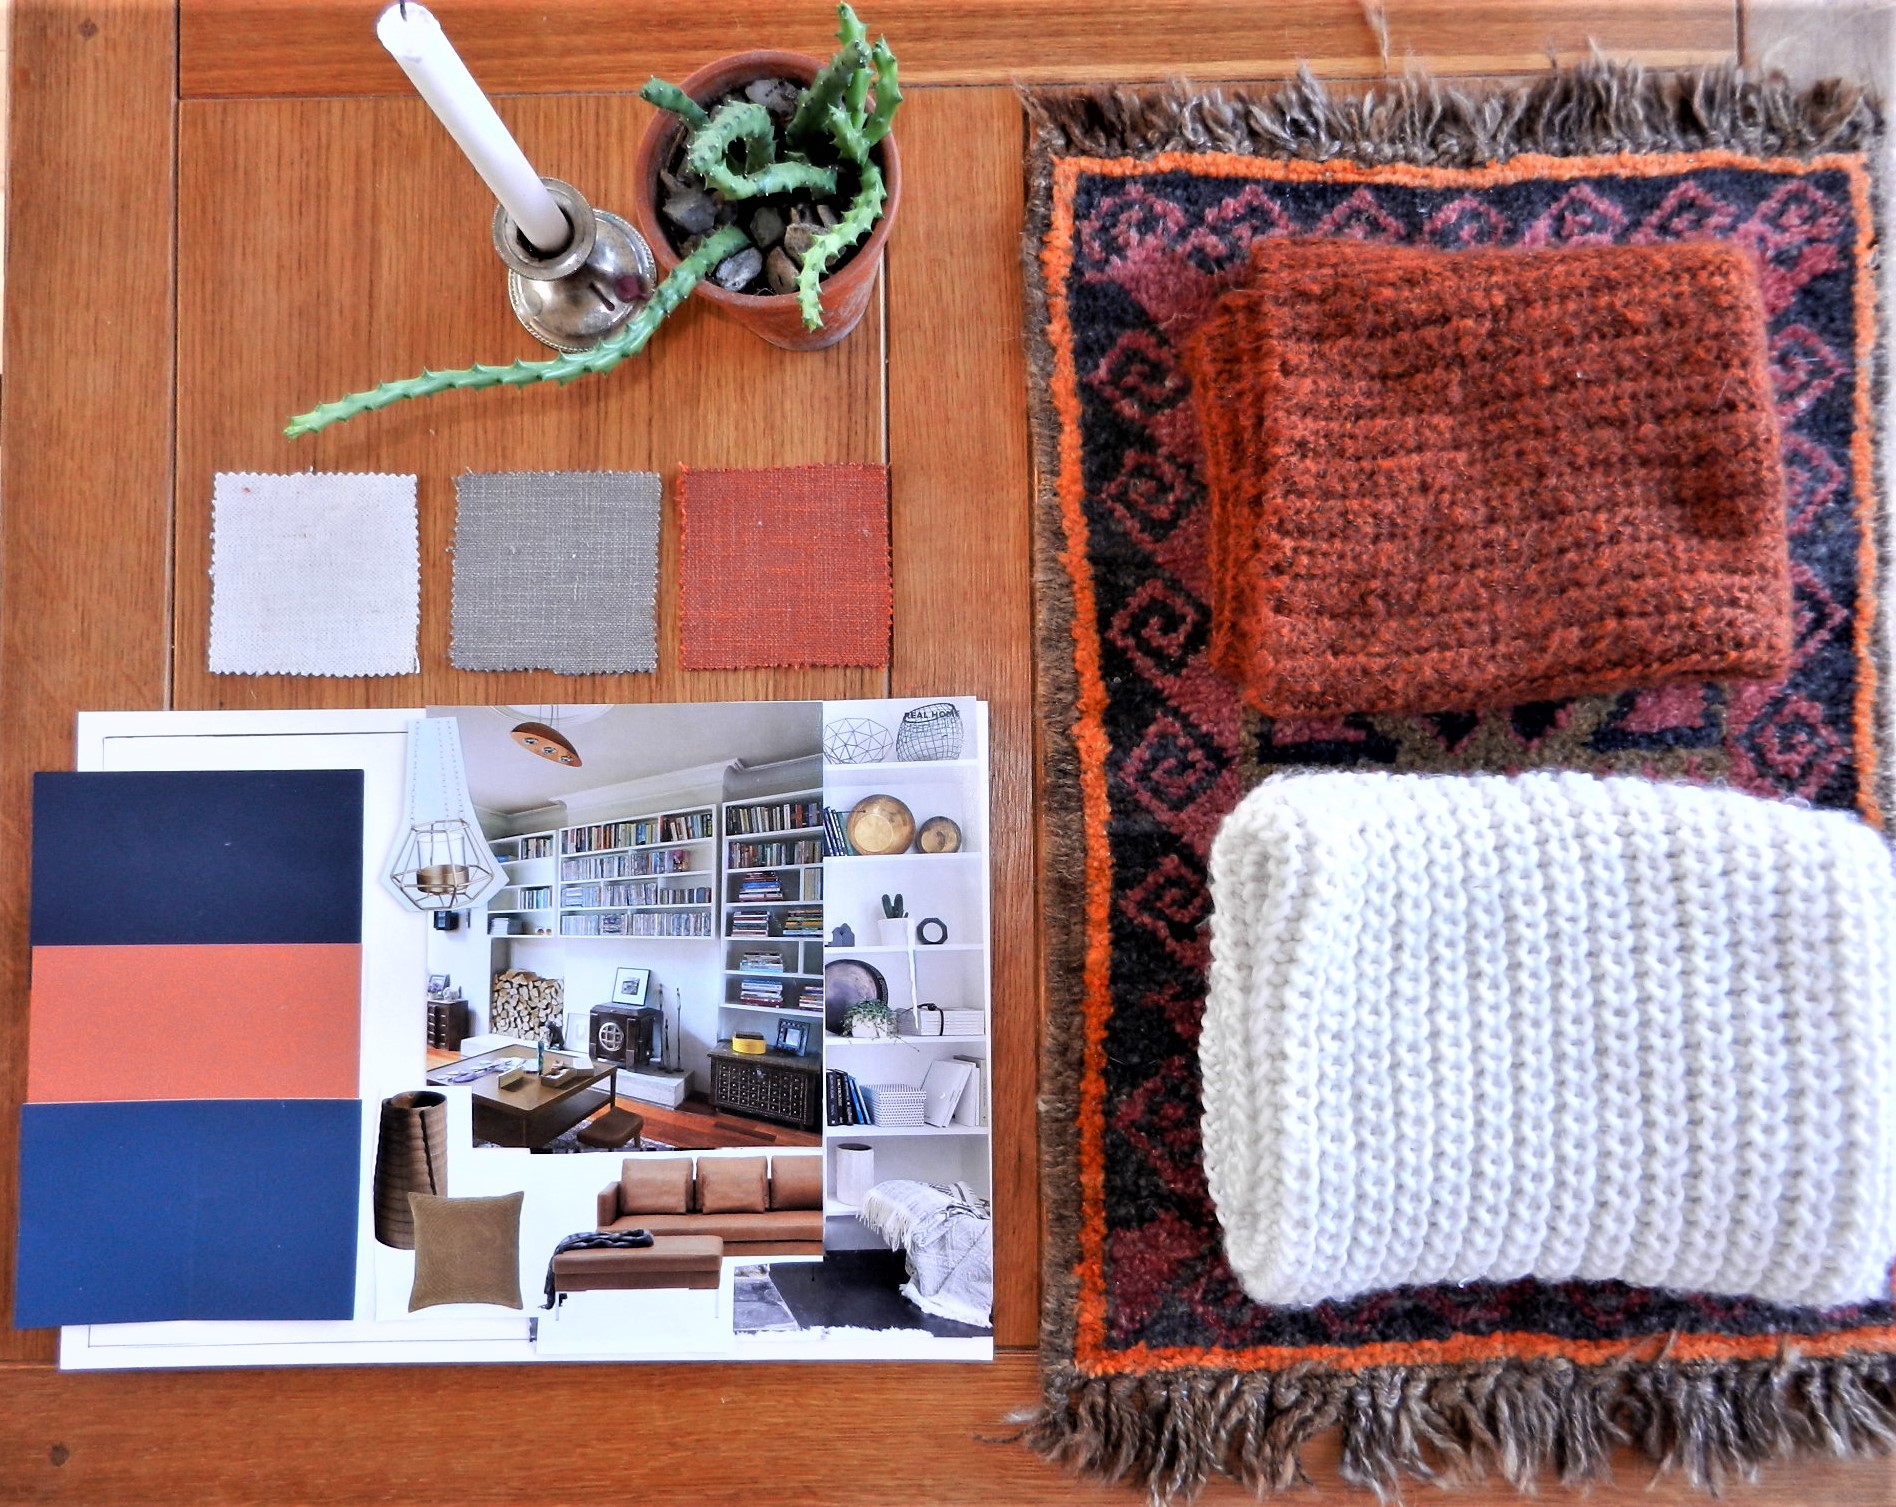 Moodboard for living space